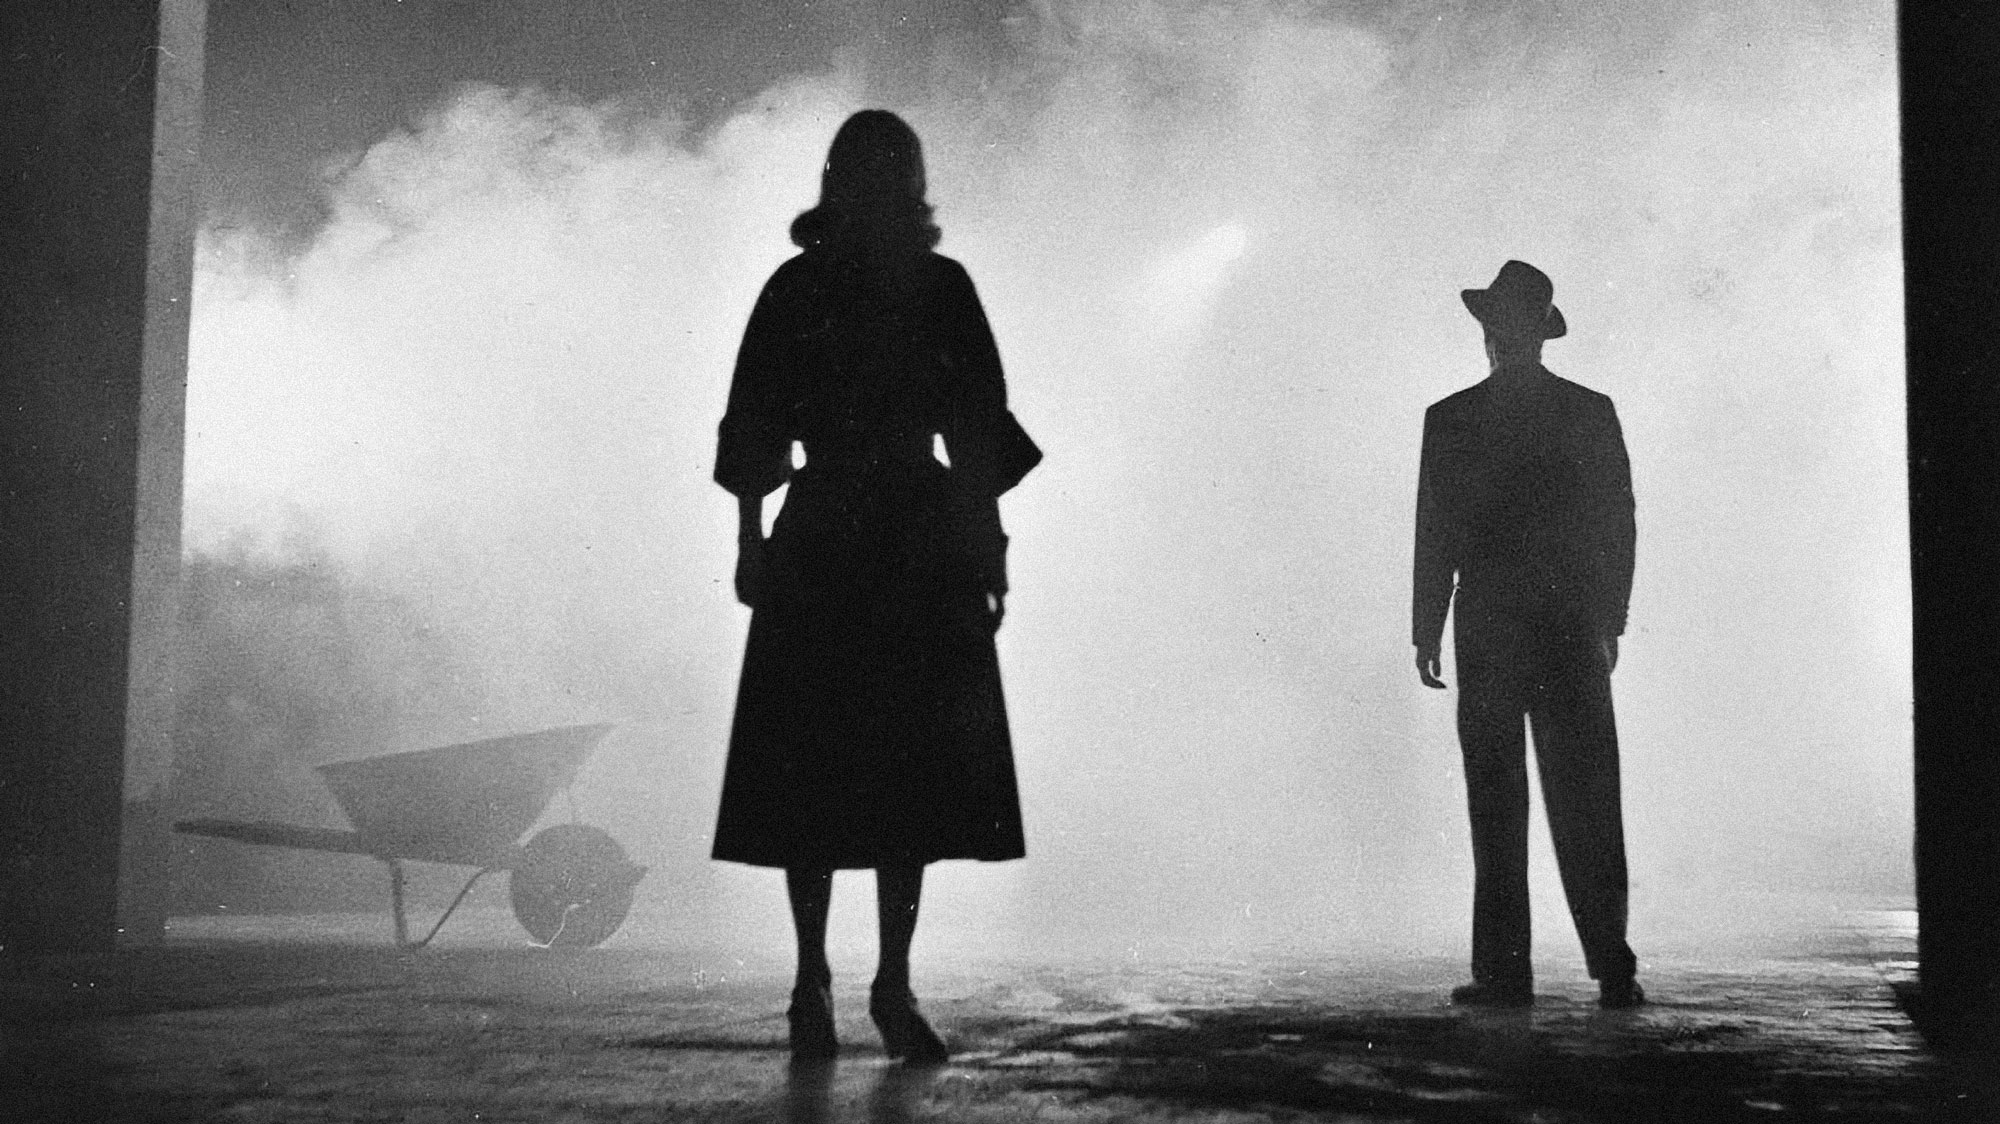 1940's scene of a man and woman with backs to the viewer silhouetted in fog. 